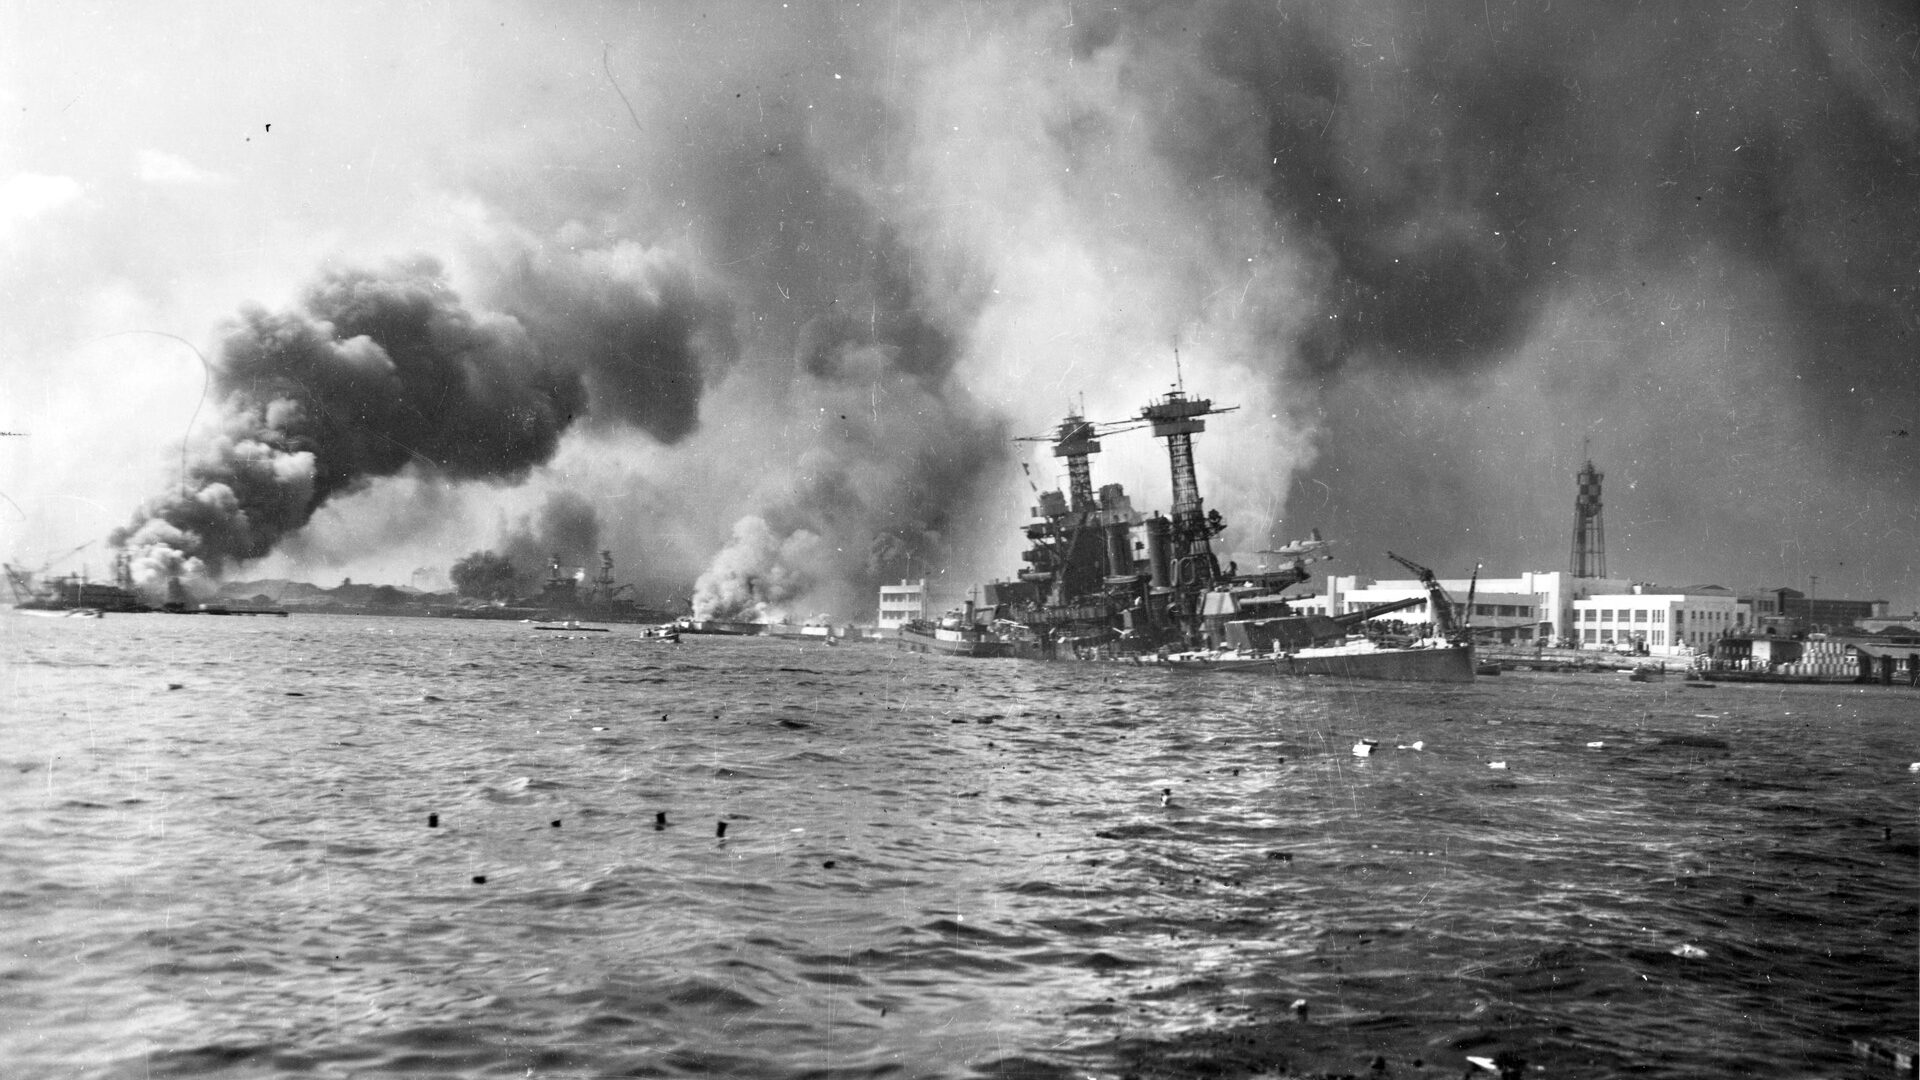 California, down by the bow, slowly sinks at its mooring adjacent to Ford Island. In the distance, the destroyer USS Shaw has exploded and burns in dry dock at far left, while the battleship Nevada, the only capital ship of the Pacific Fleet to get underway during the attack, lies beached after sustaining severe damage. 